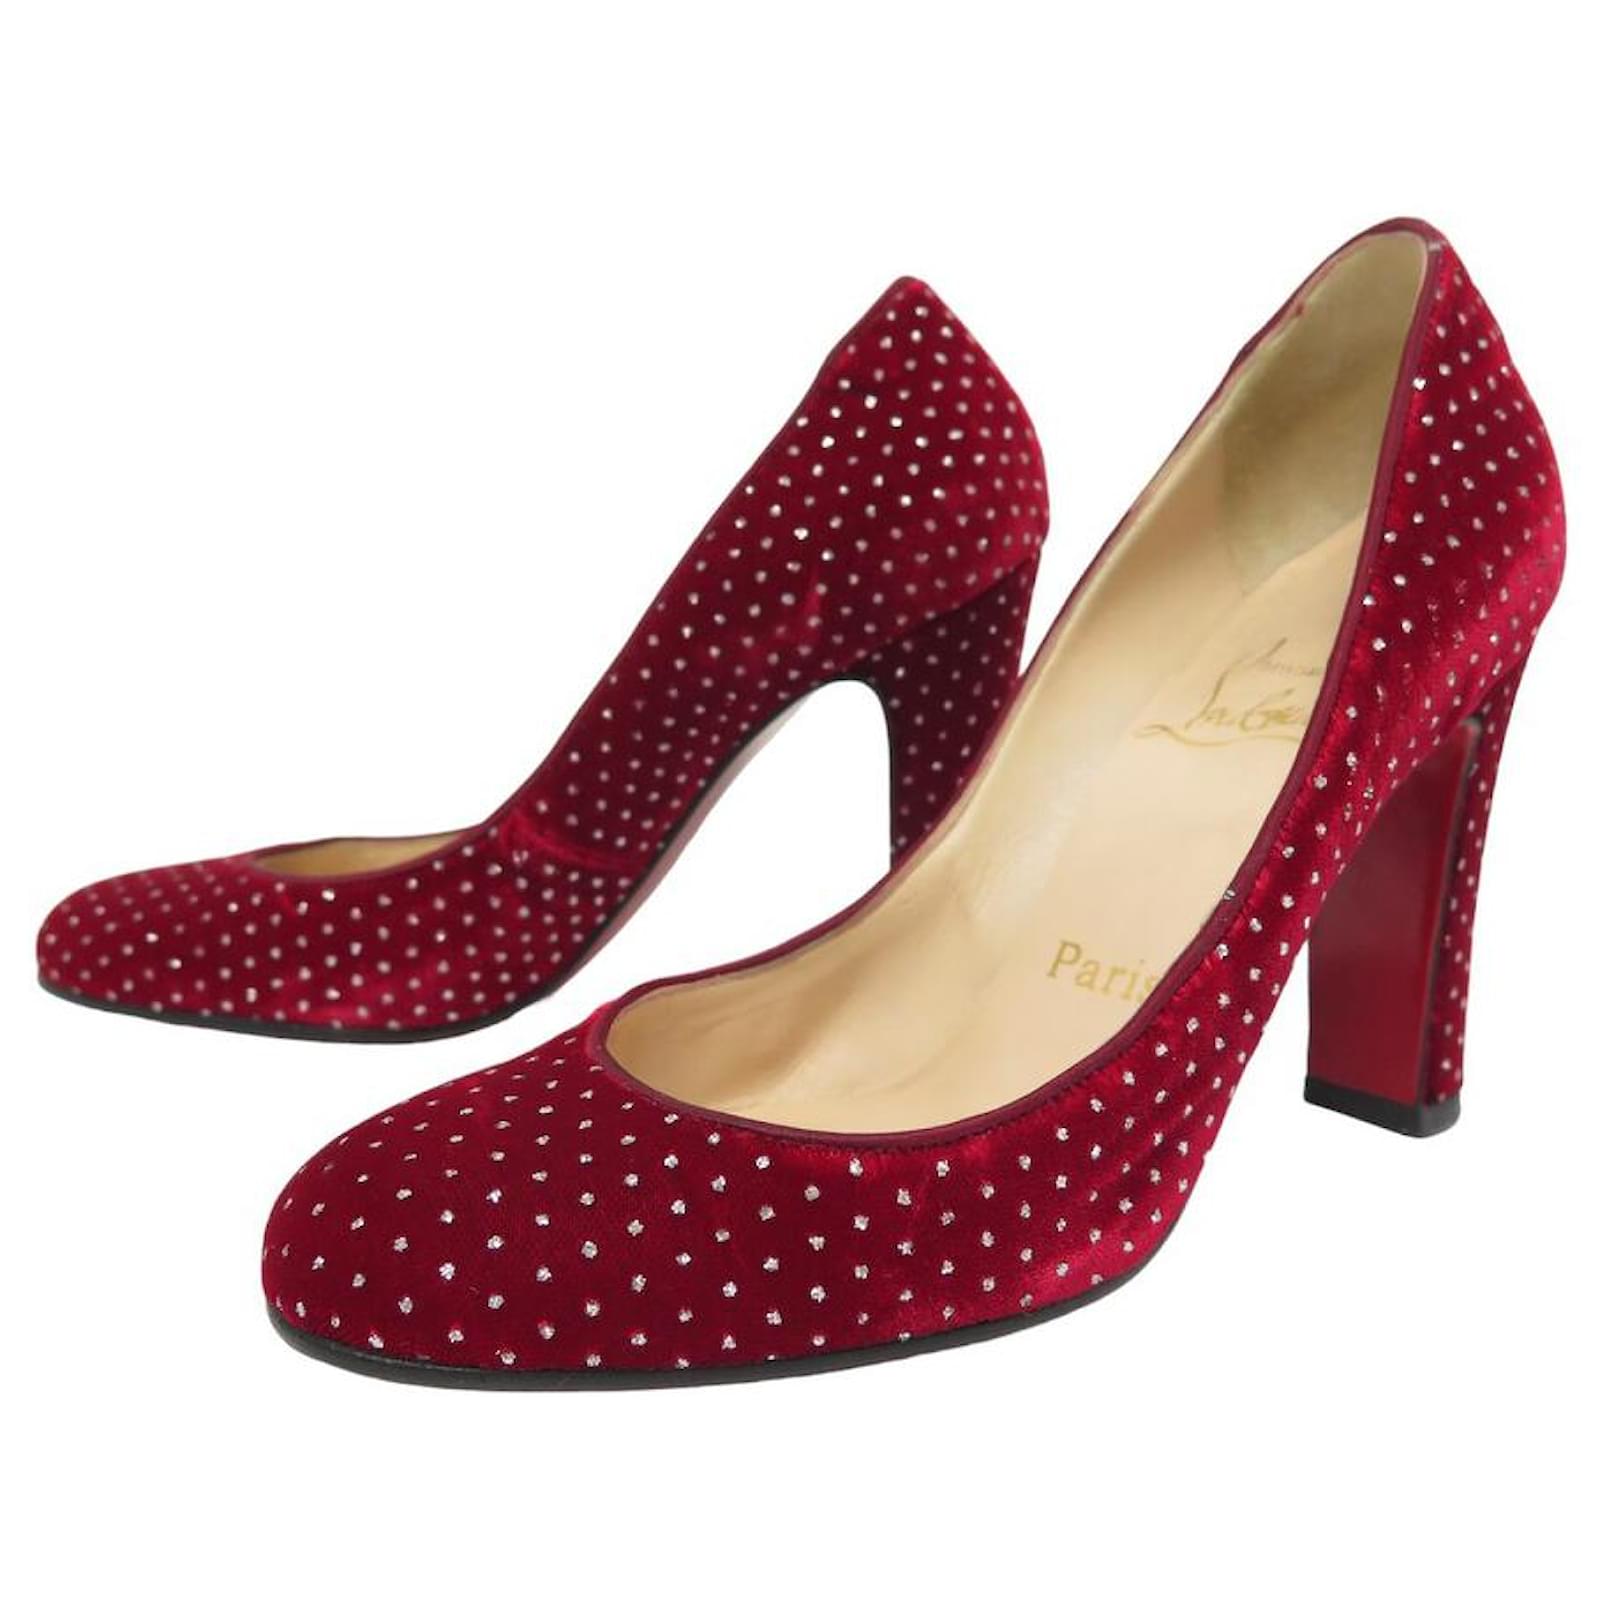 CHRISTIAN LOUBOUTIN SHOES 35 POINTED VELVET HEEL PUMPS SHOES Red